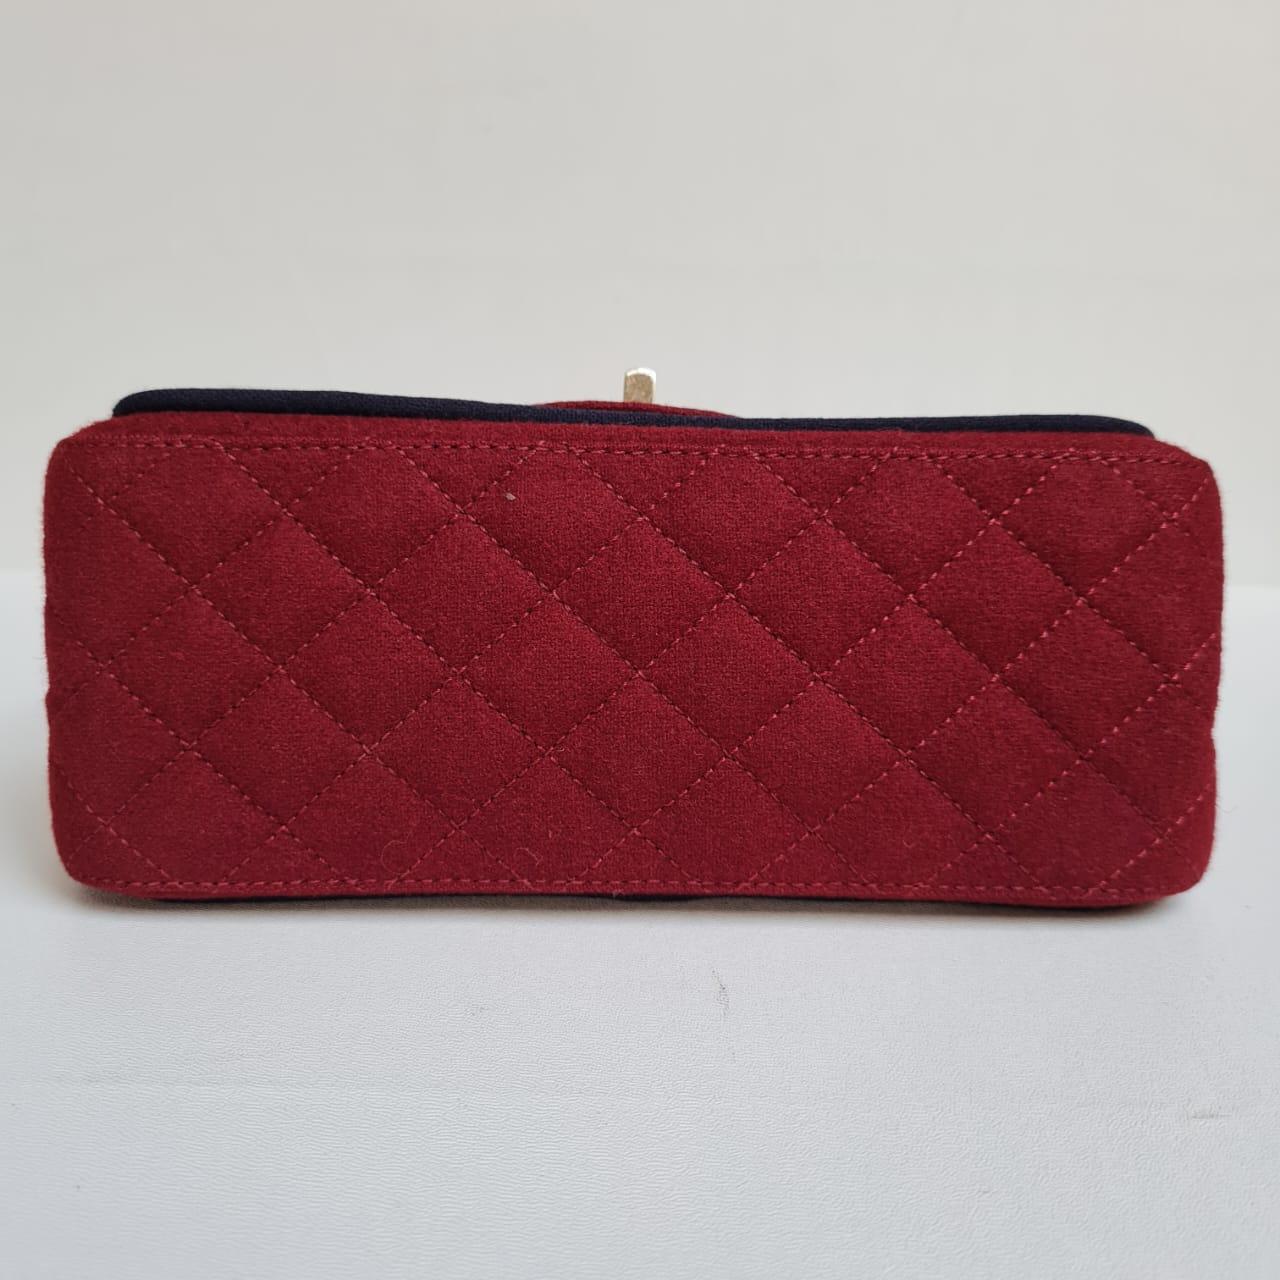 Chanel 2015 Red Edelweiss Reissue Wool Flap Bag For Sale 7